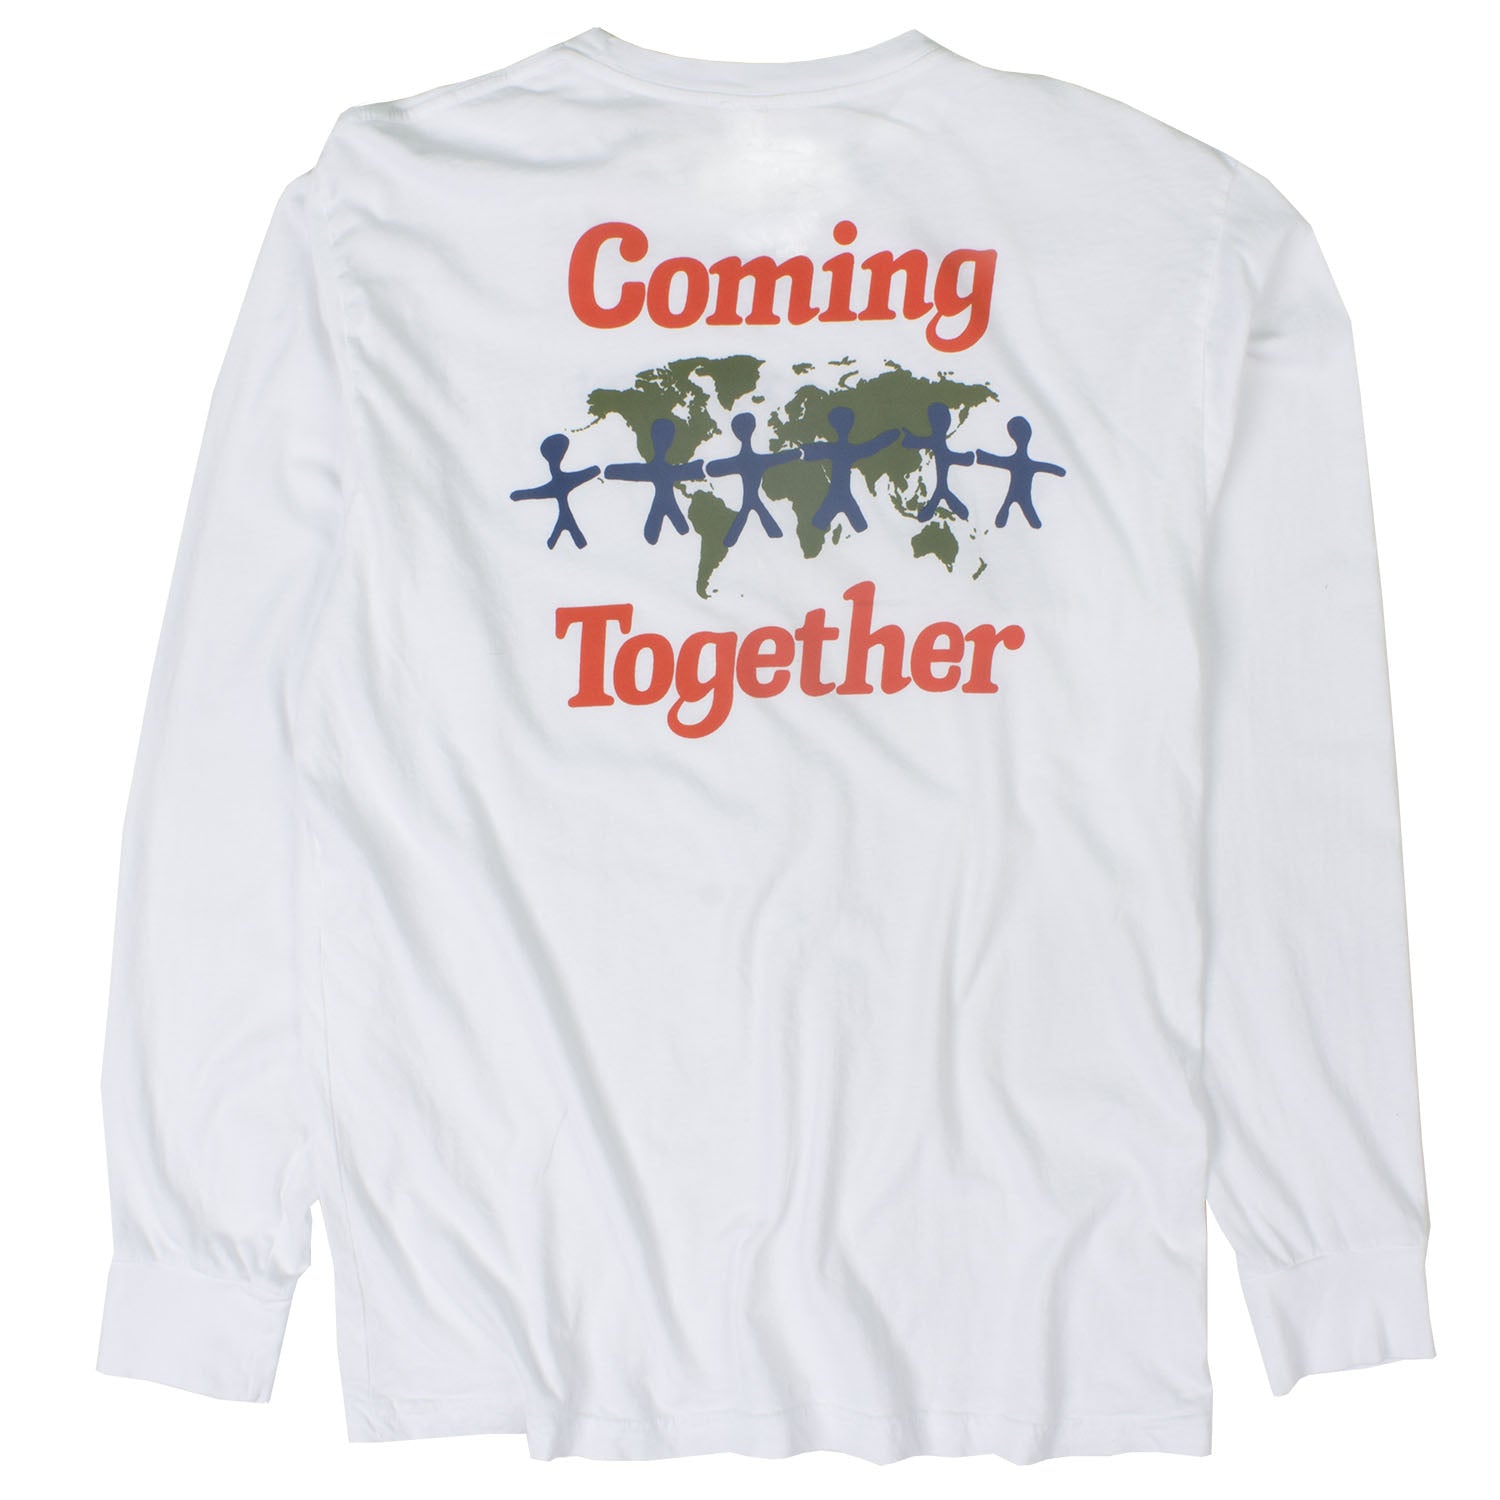 Coming Together Lets Talk L/S white front and back printed graphic tee